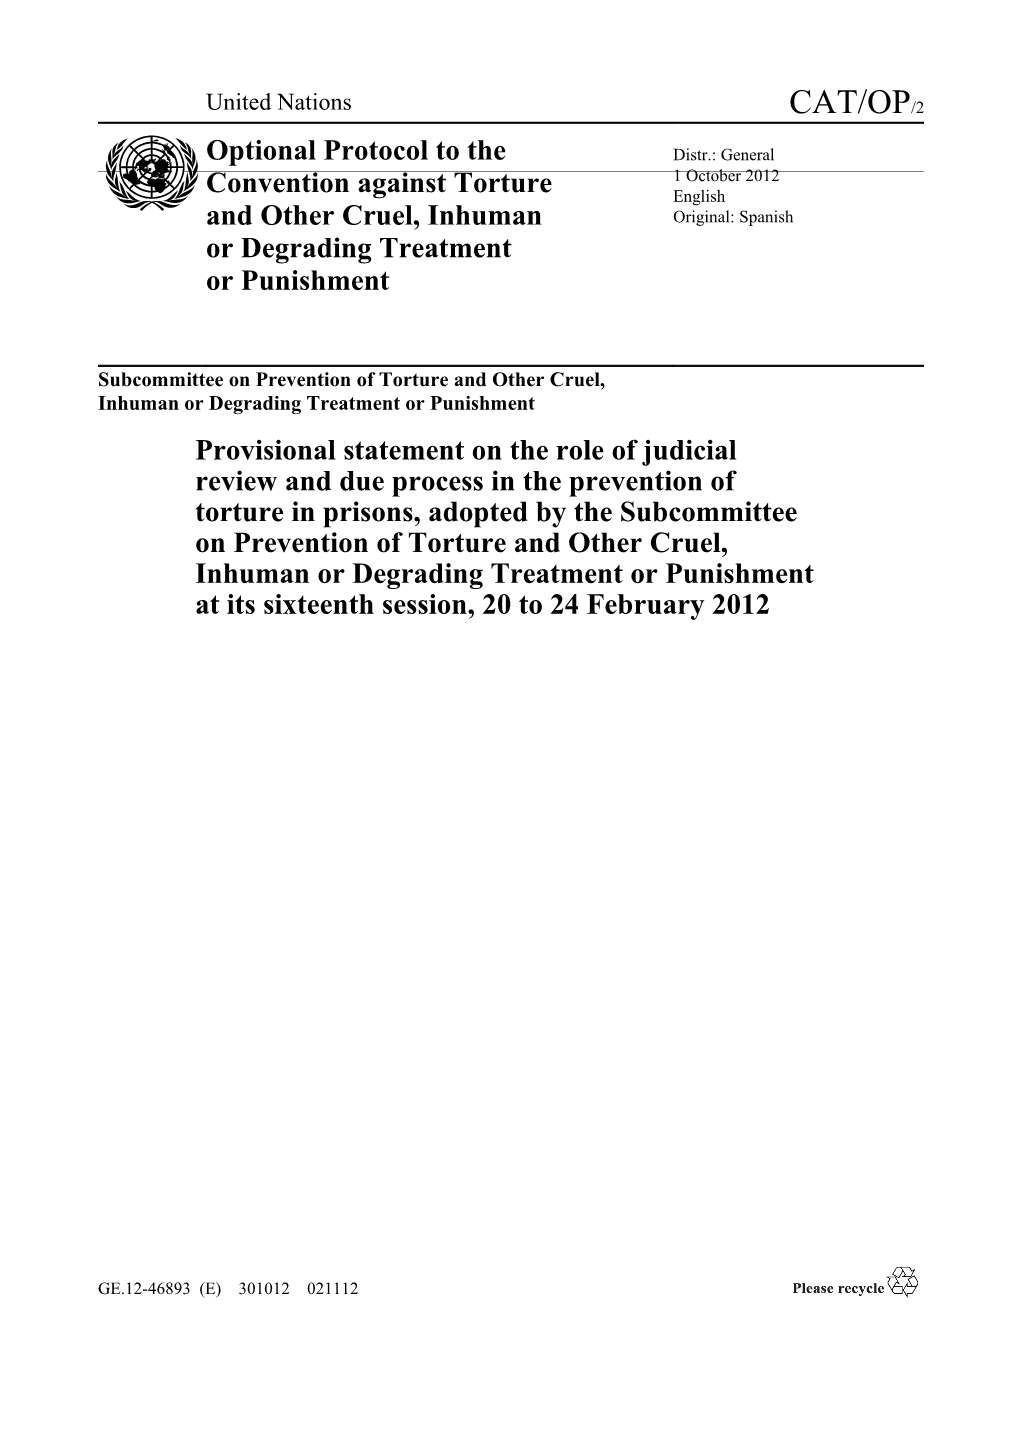 Subcommittee on Prevention of Torture and Other Cruel, Inhuman Or Degrading Treatment